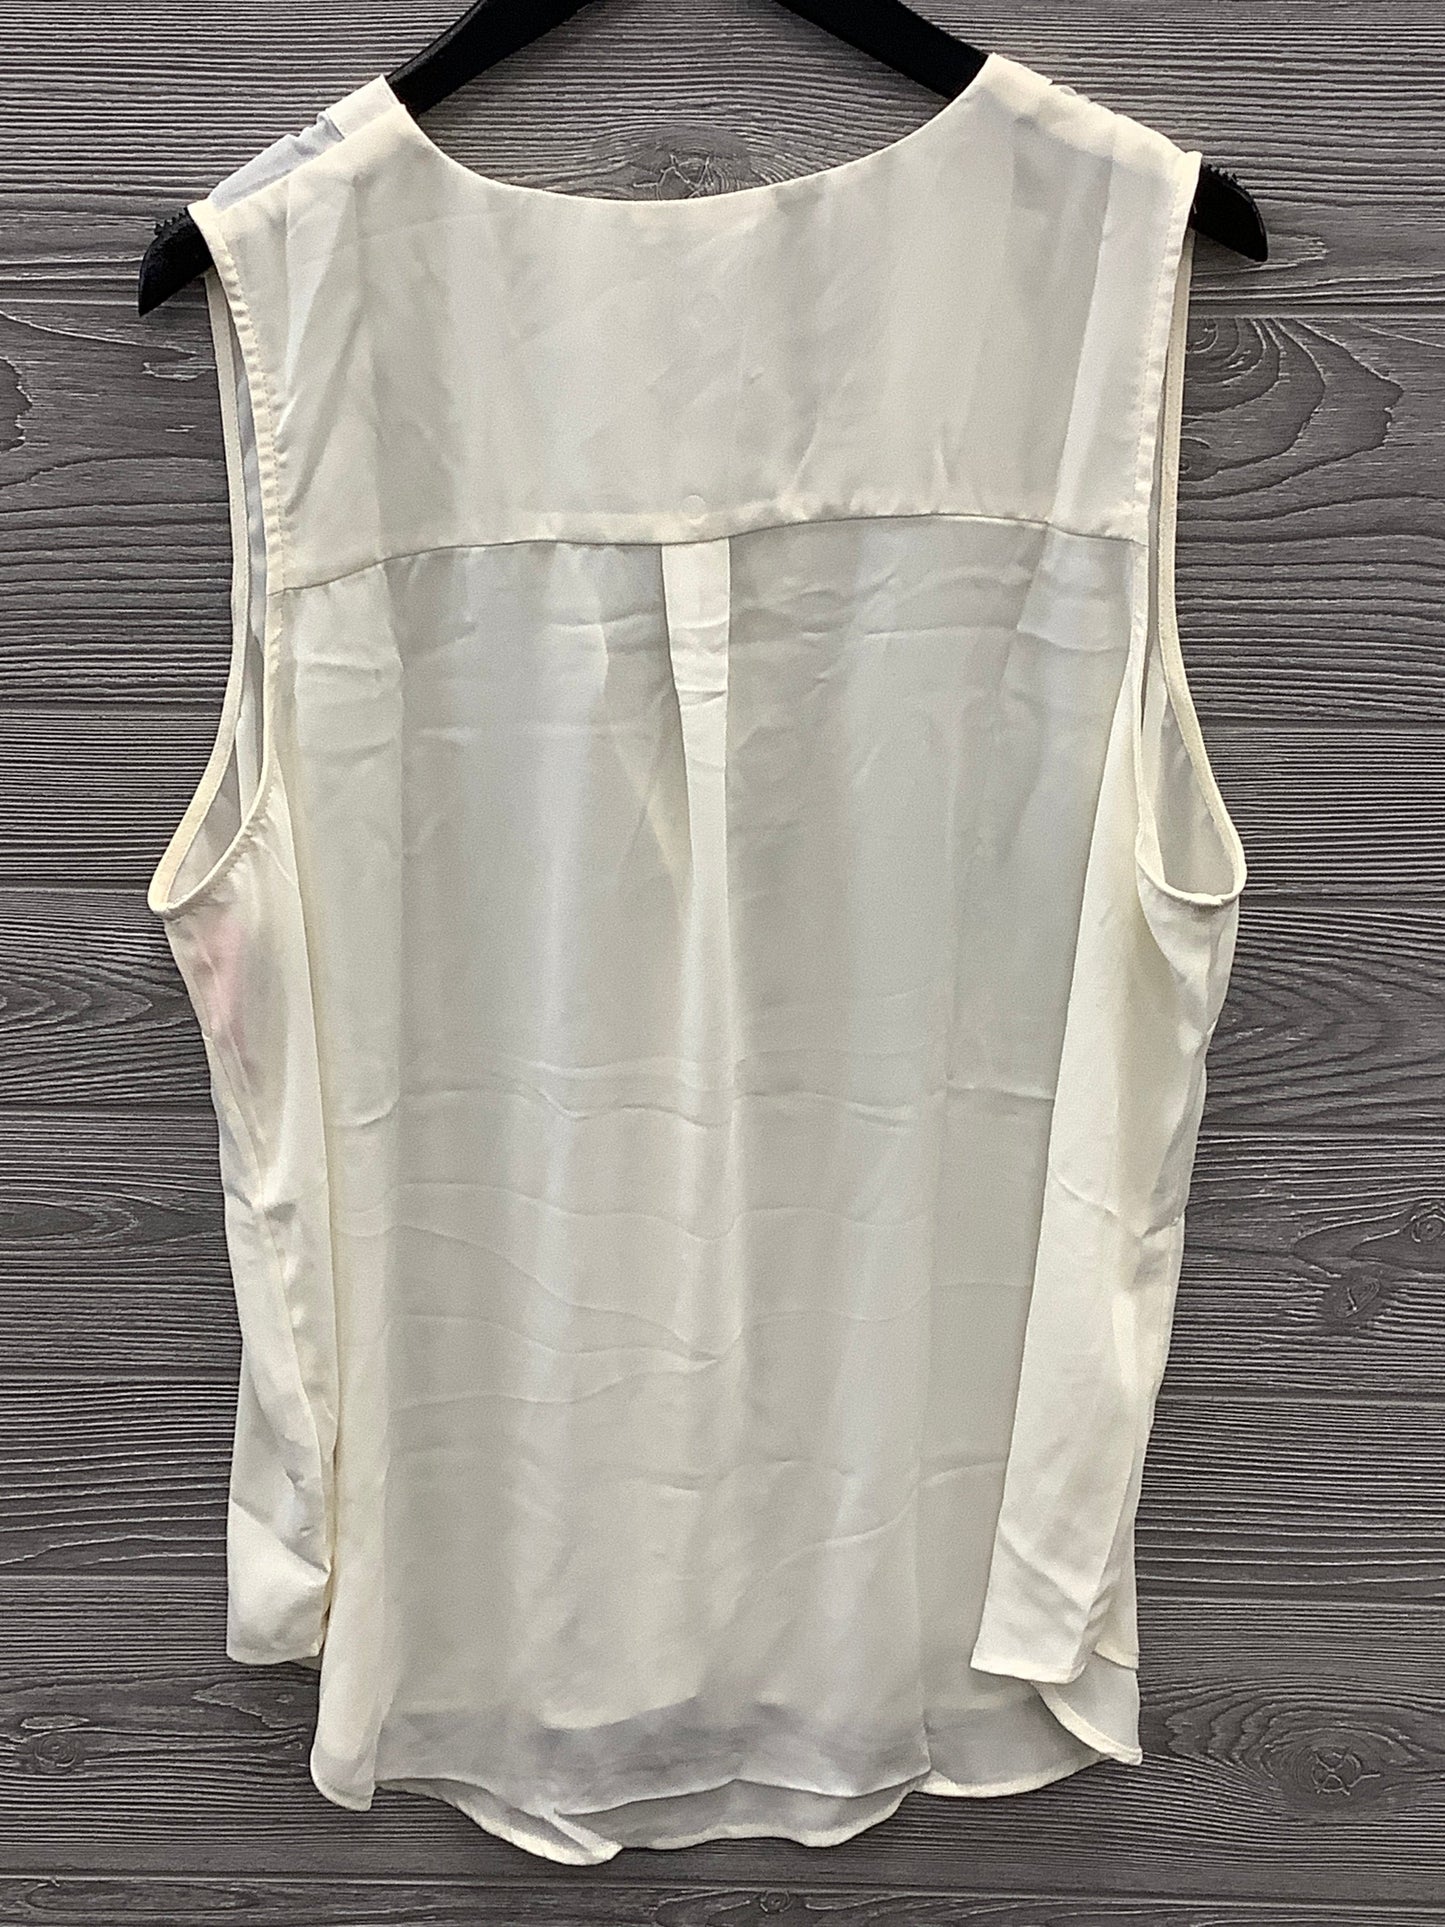 Blouse Sleeveless By Maurices  Size: 1x